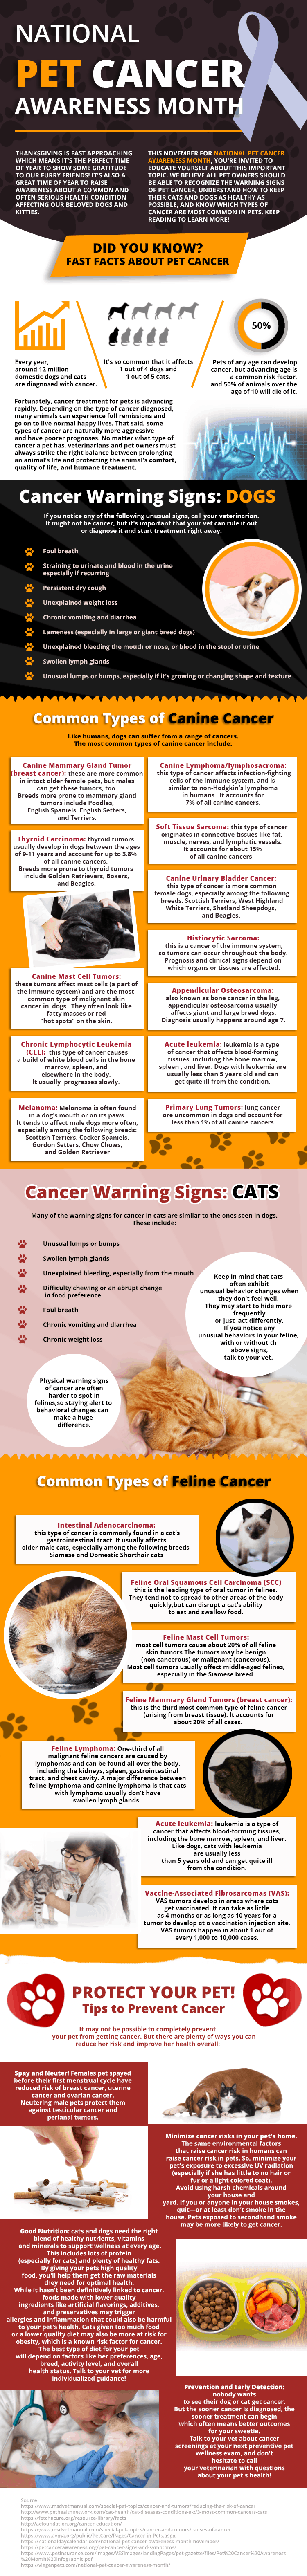 What do you know about pet cancer? I'm betting not as much as you think. Take a look at warning signs for both cats & dogs, as well as some prevention tips for both. 